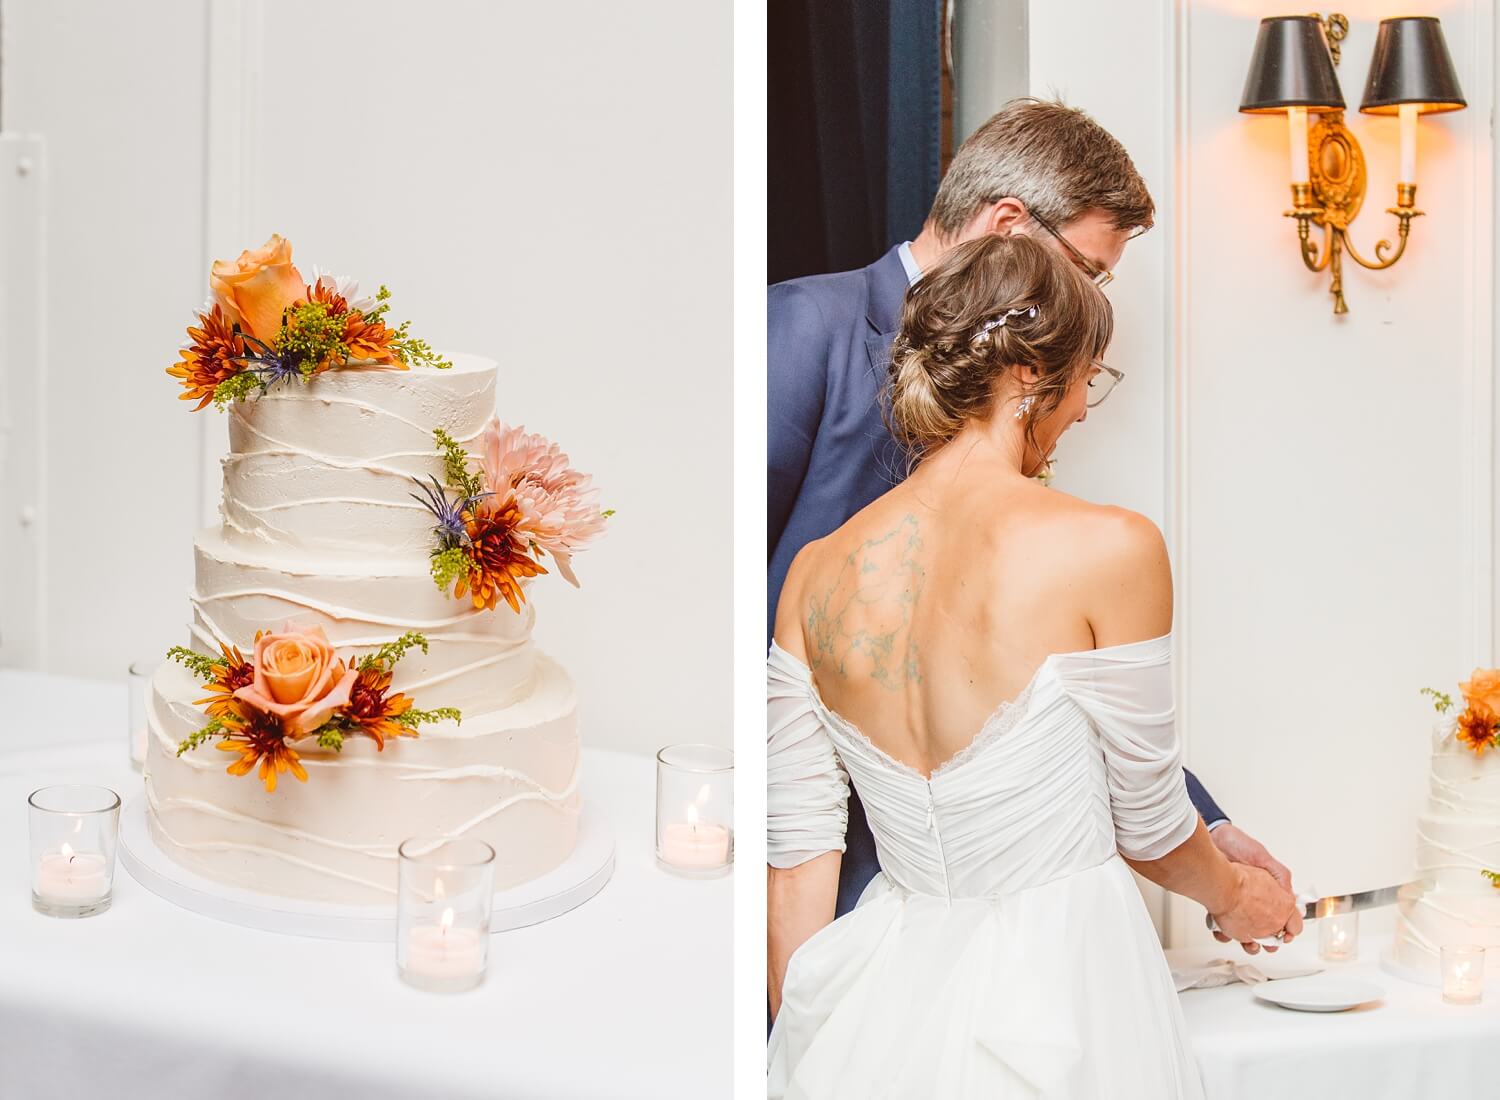 Three tier white wedding cake with fresh flowers | bride and groom cutting cake | Brooke Michelle Photography